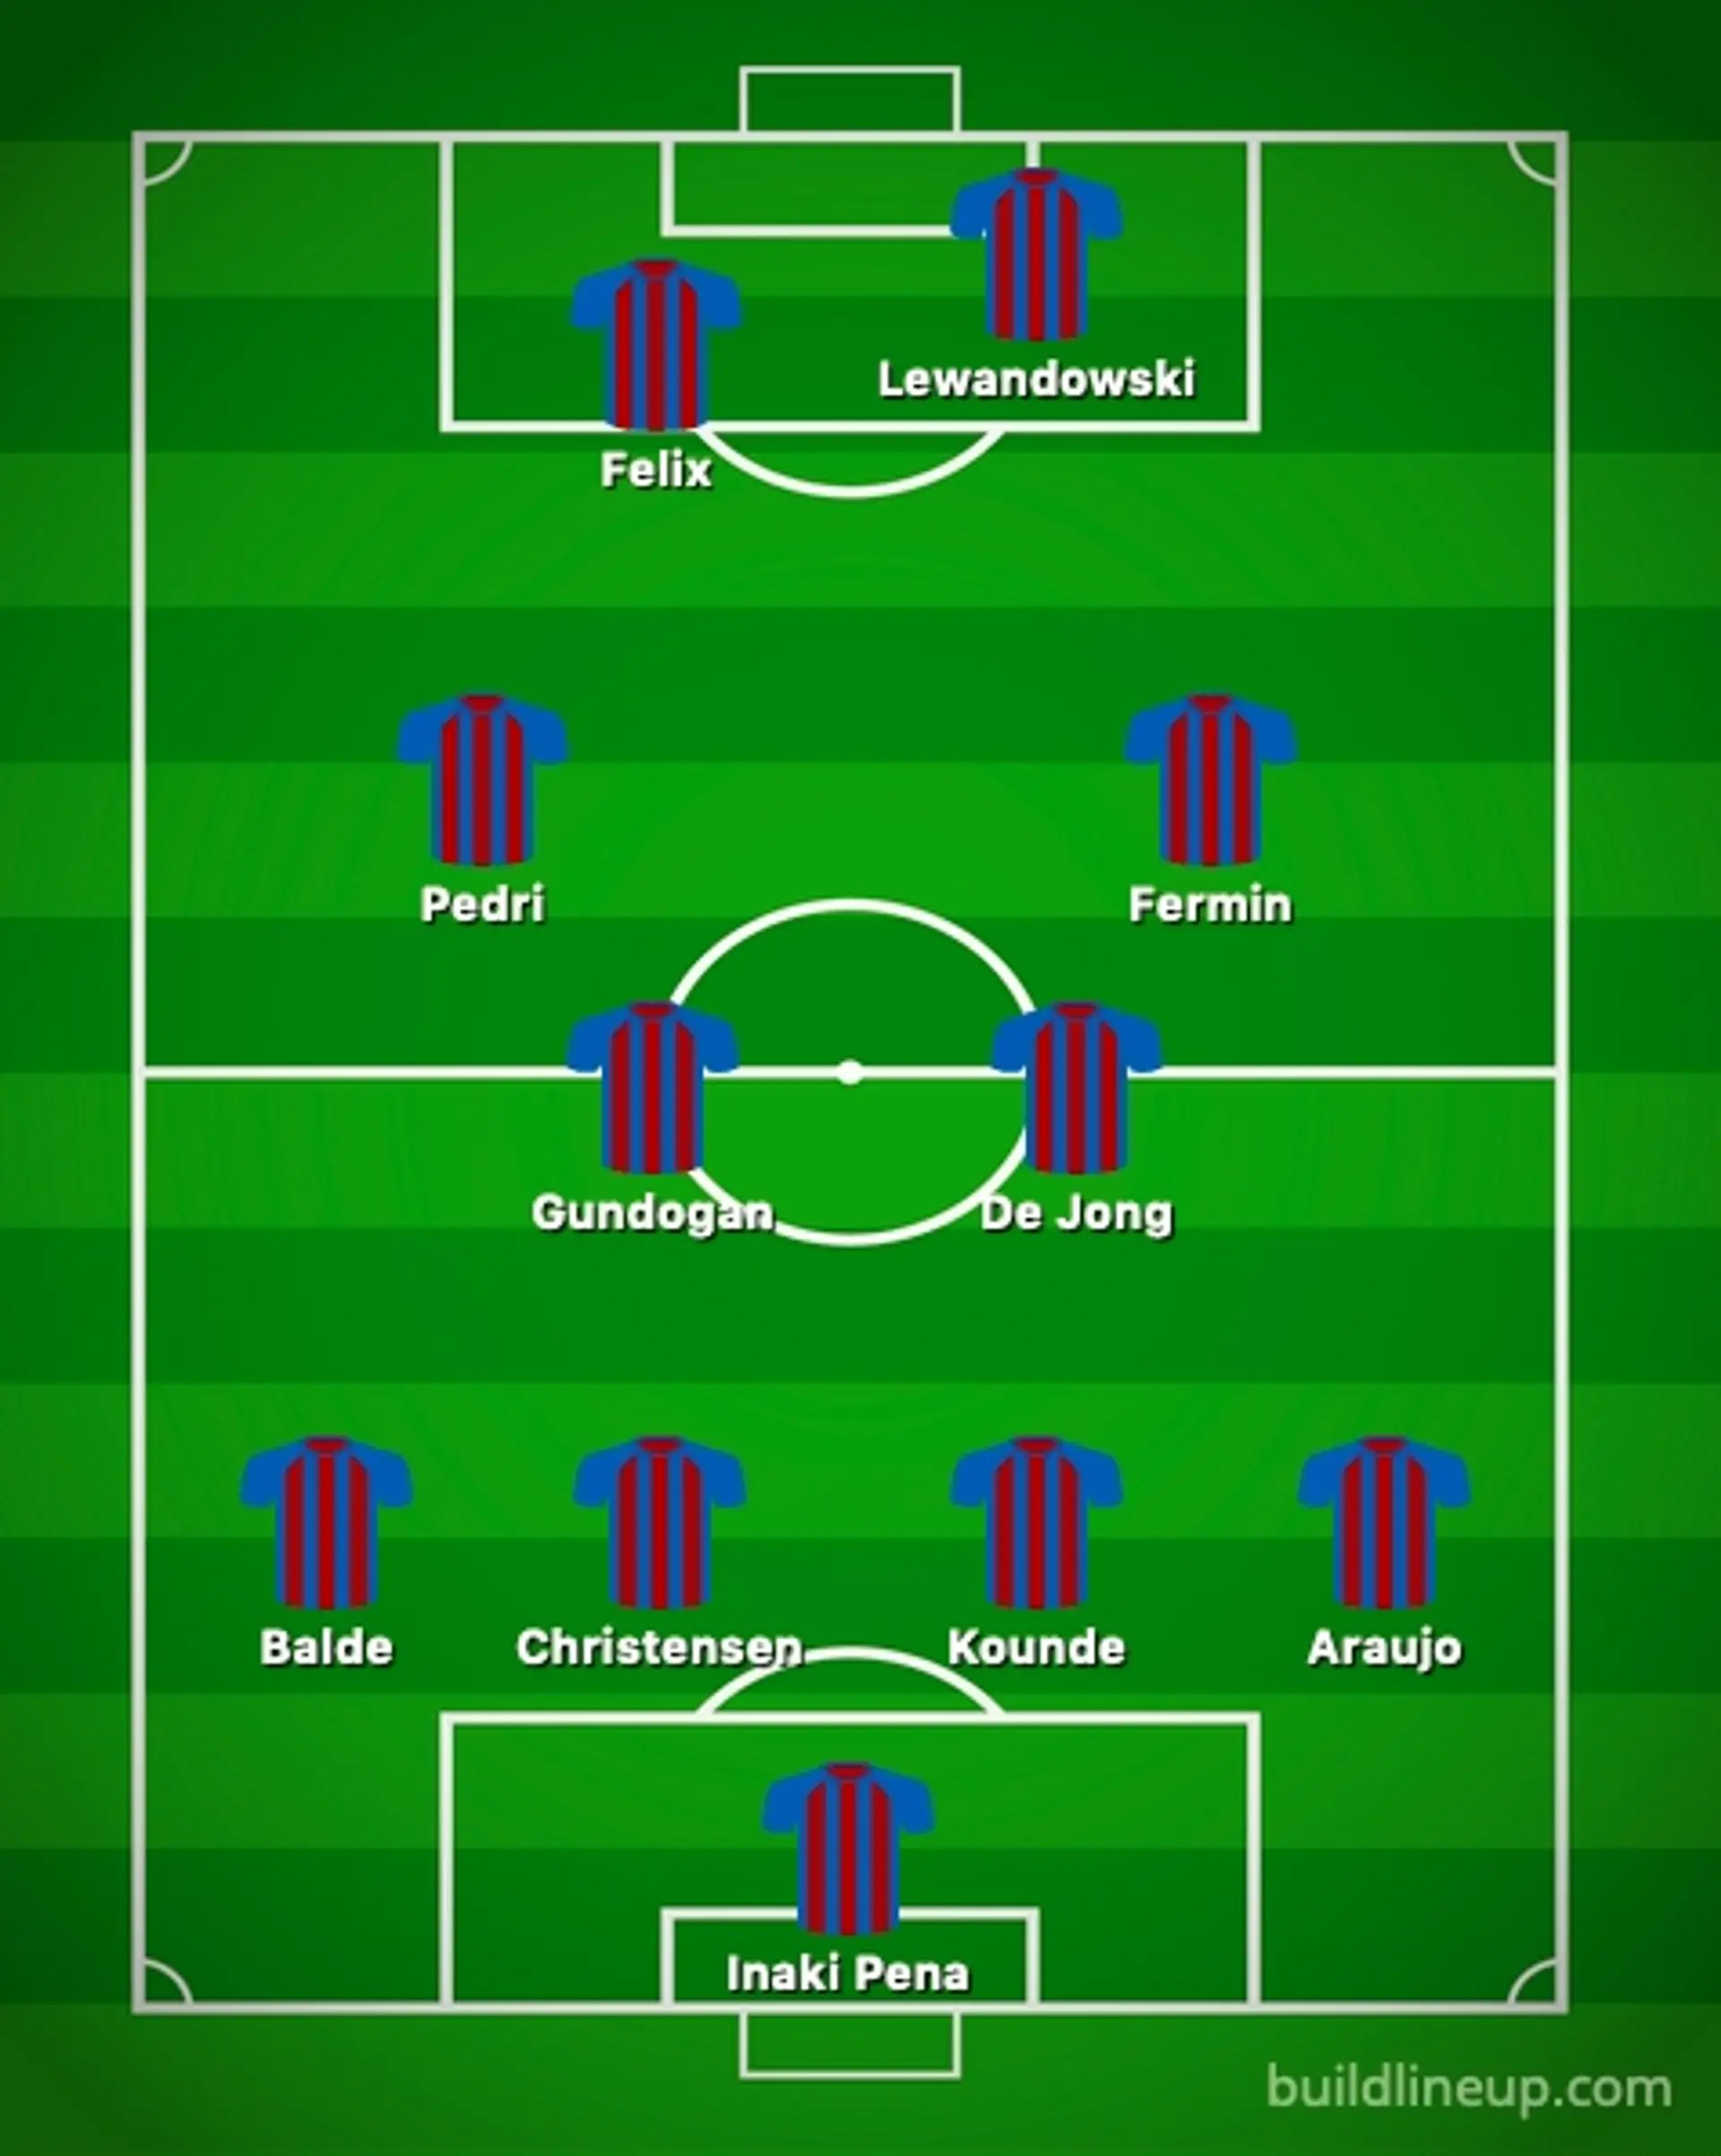 Best line up to win the El clasico super cup